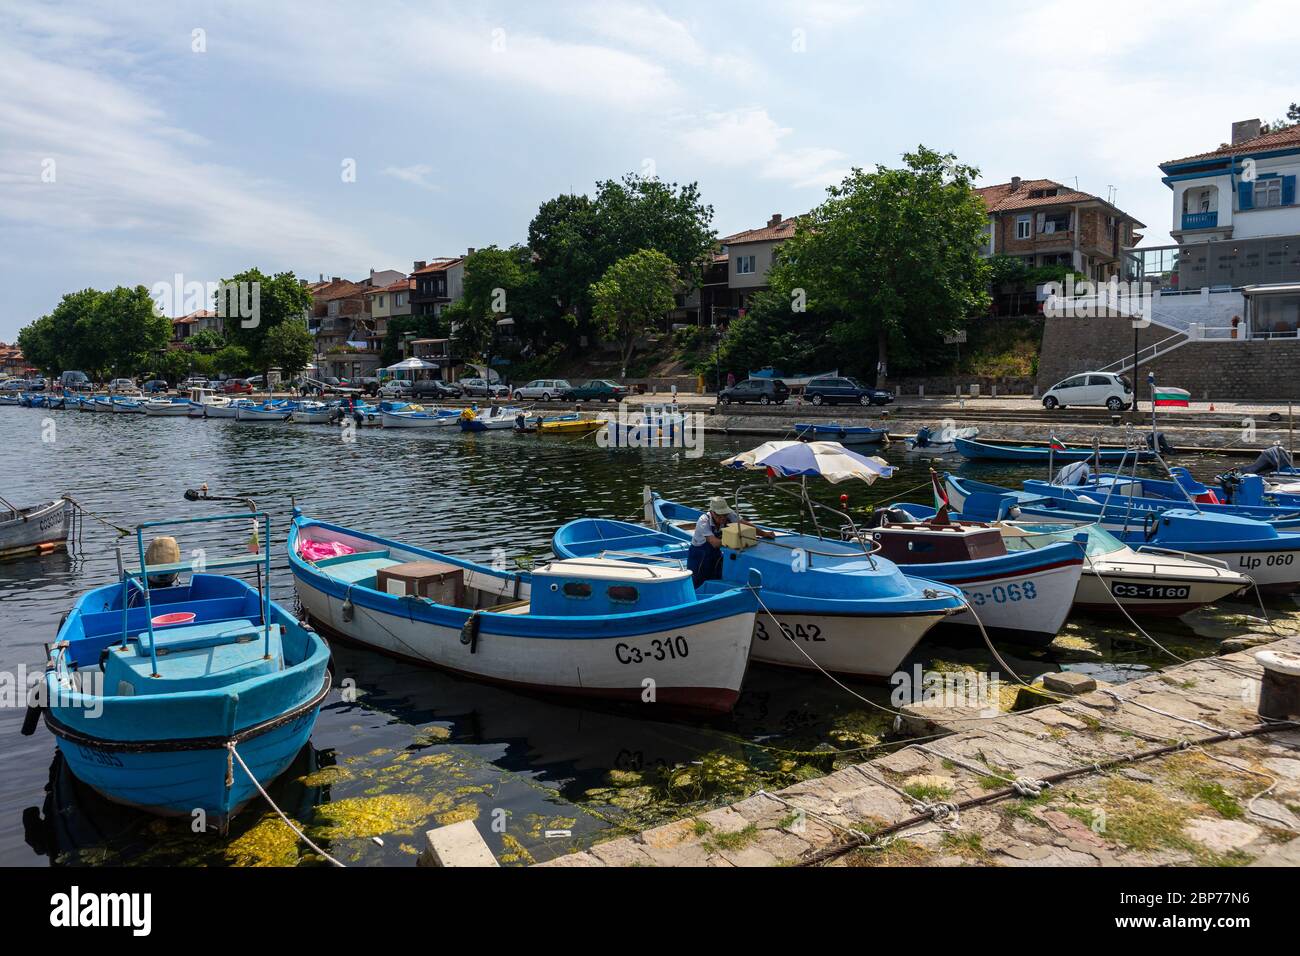 SOZOPOL, BULGARIA - JUNE 28, 2019: Fishing boats at the seaport are at the pier. Stock Photo